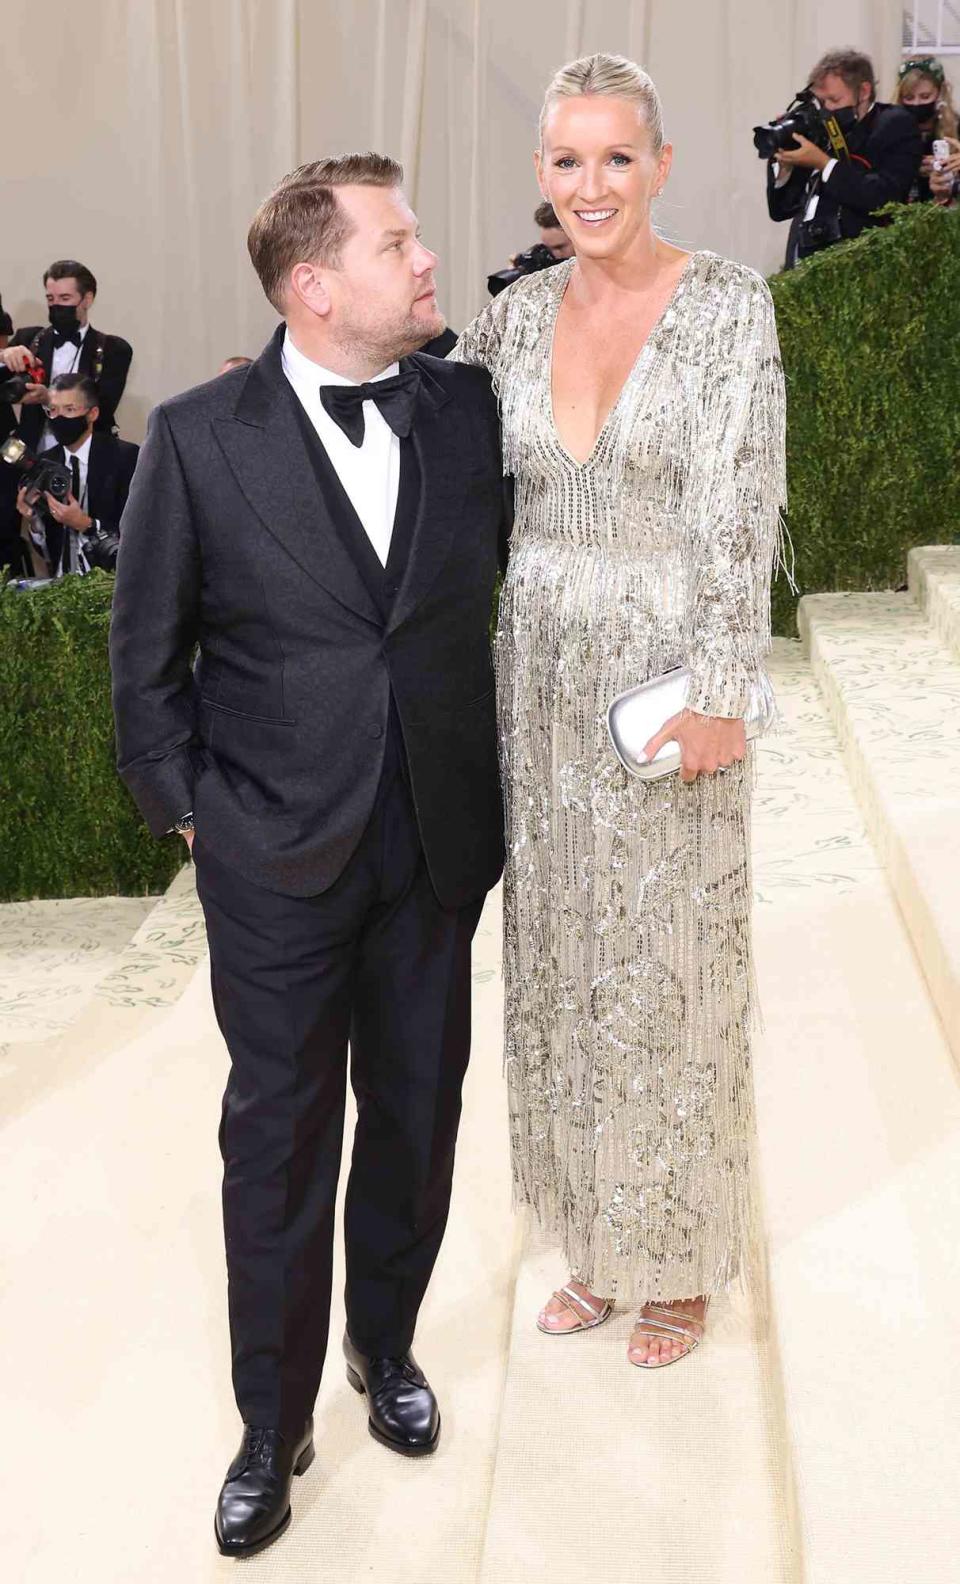 James Corden and Julia Carey attend the 2021 Met Gala benefit "In America: A Lexicon of Fashion" at Metropolitan Museum of Art on September 13, 2021 in New York City